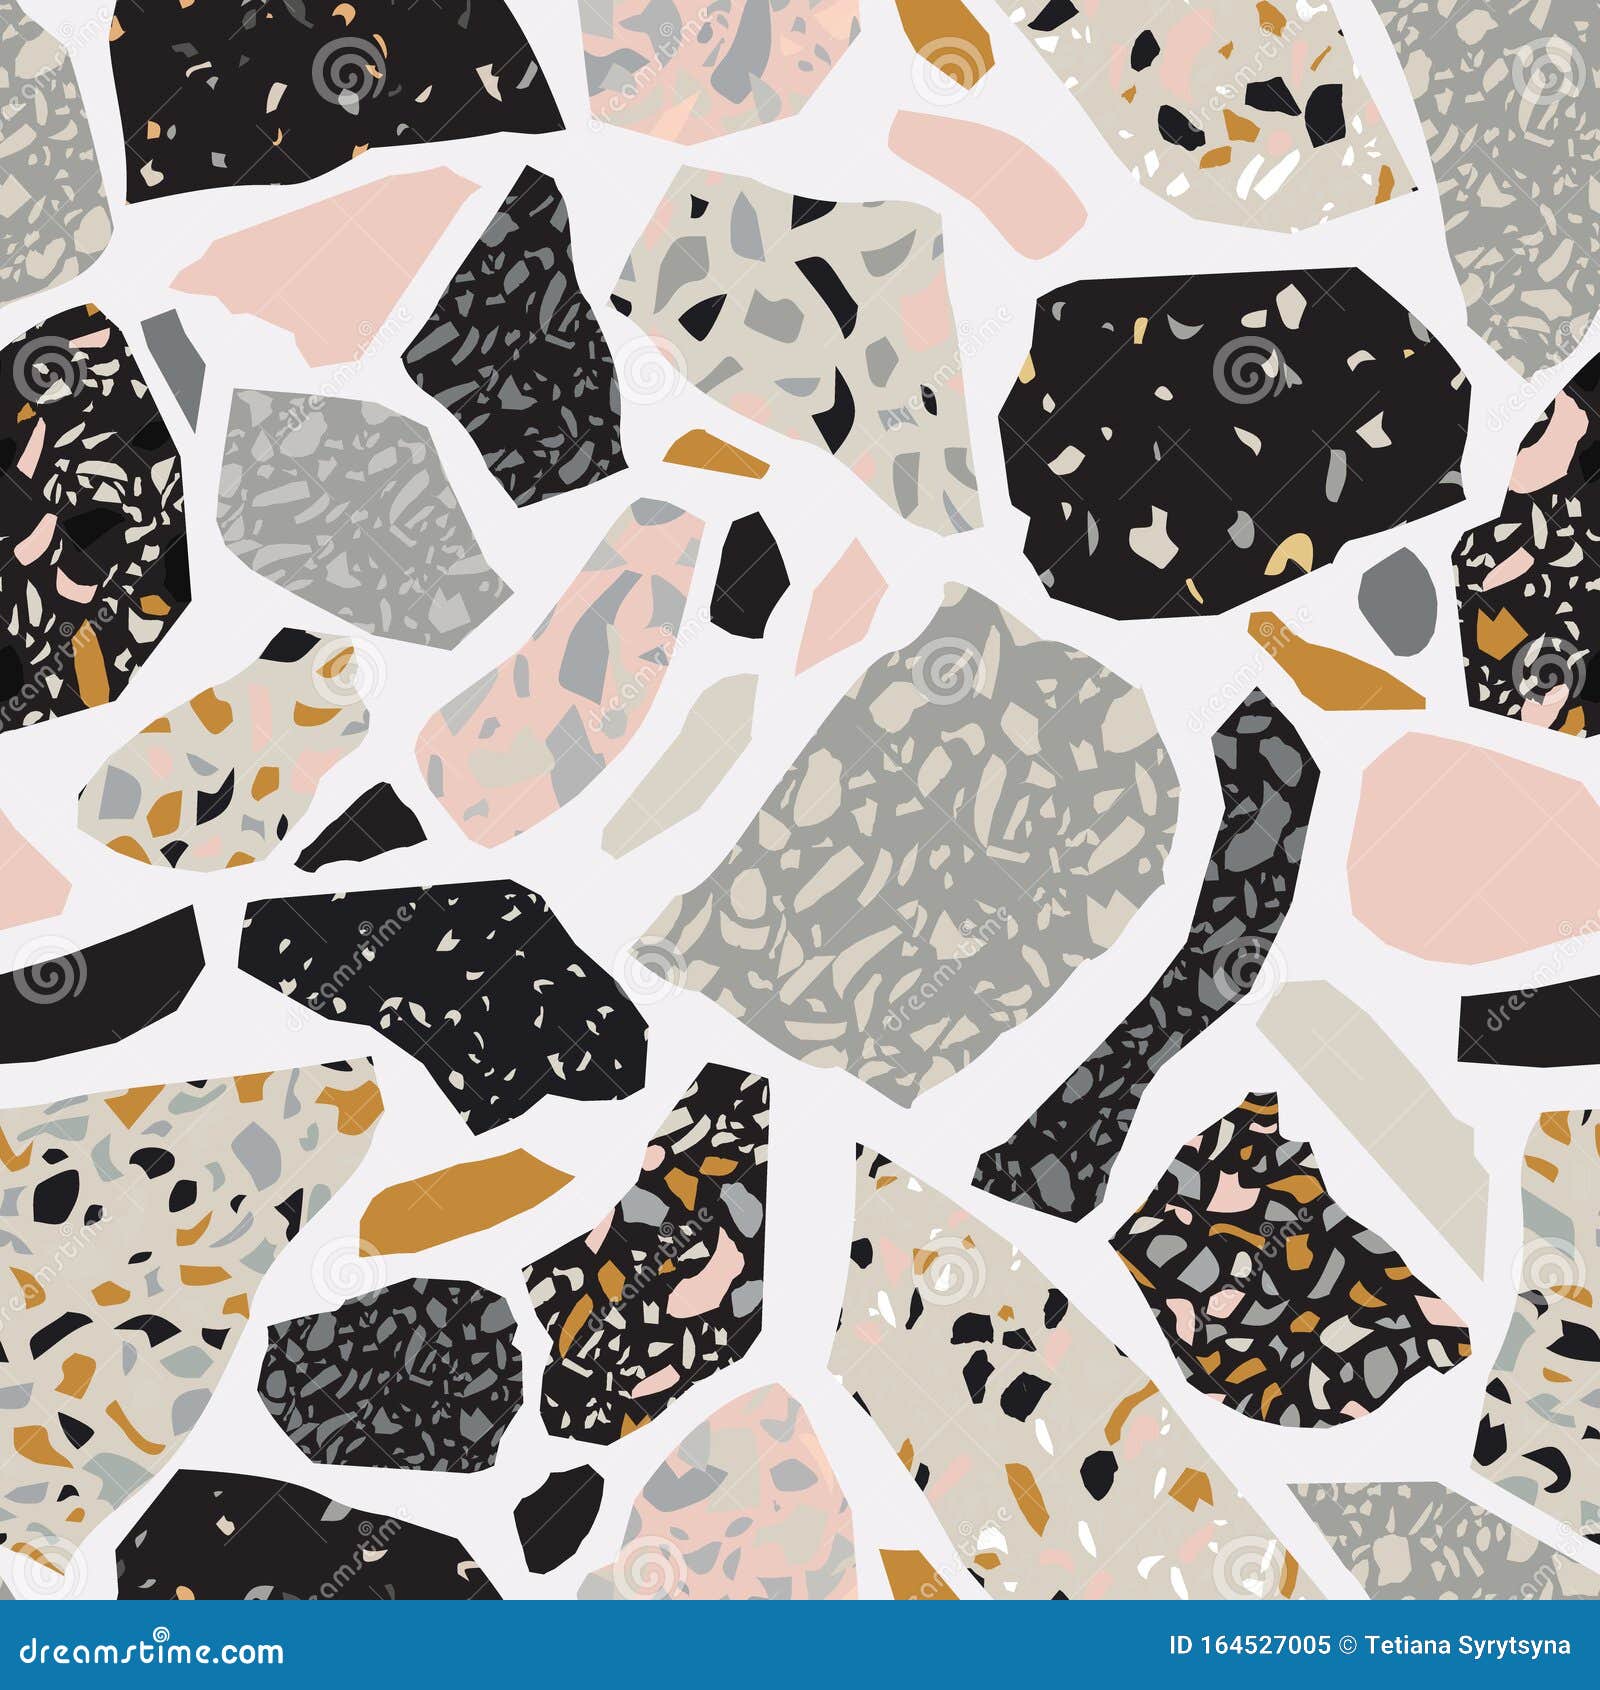 Seamless rock or stone shaped contour pattern print. High quality  illustration. Terrazzo like mosaic of natural rounded curve shapes.  Textured contemporary surface design for print. Stock Illustration